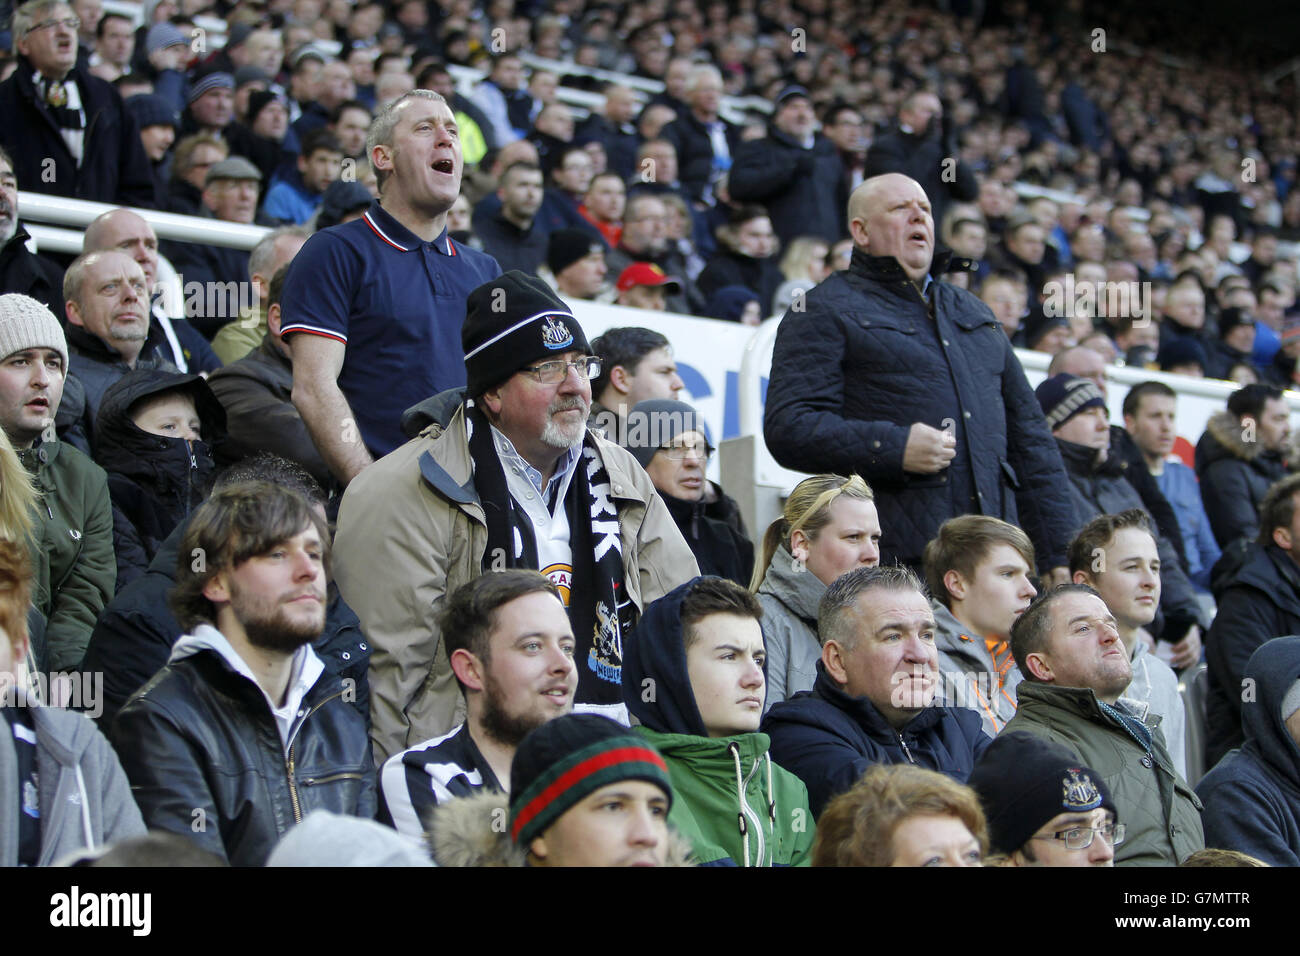 A general view of Newcastle United supporters in the crowd at St James' Park. Stock Photo